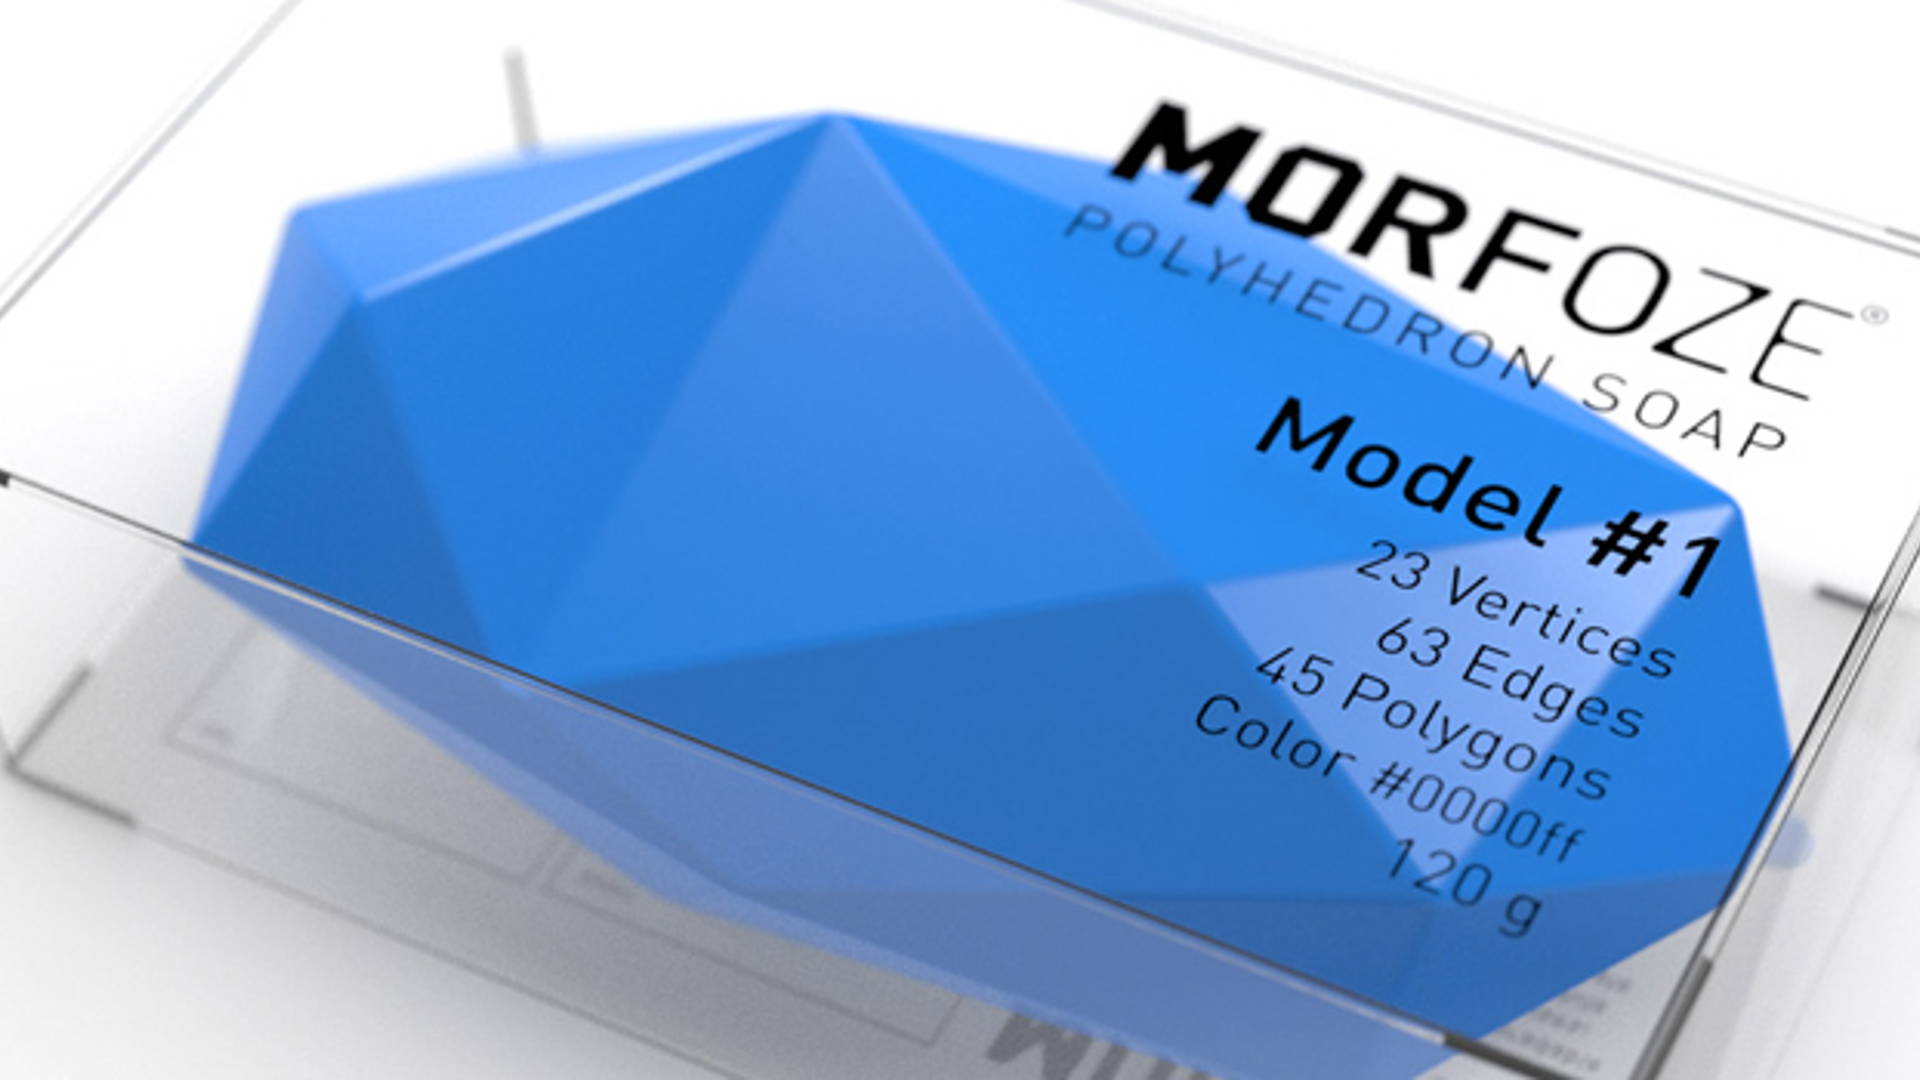 Featured image for MORFOZE Polyhedron Soap